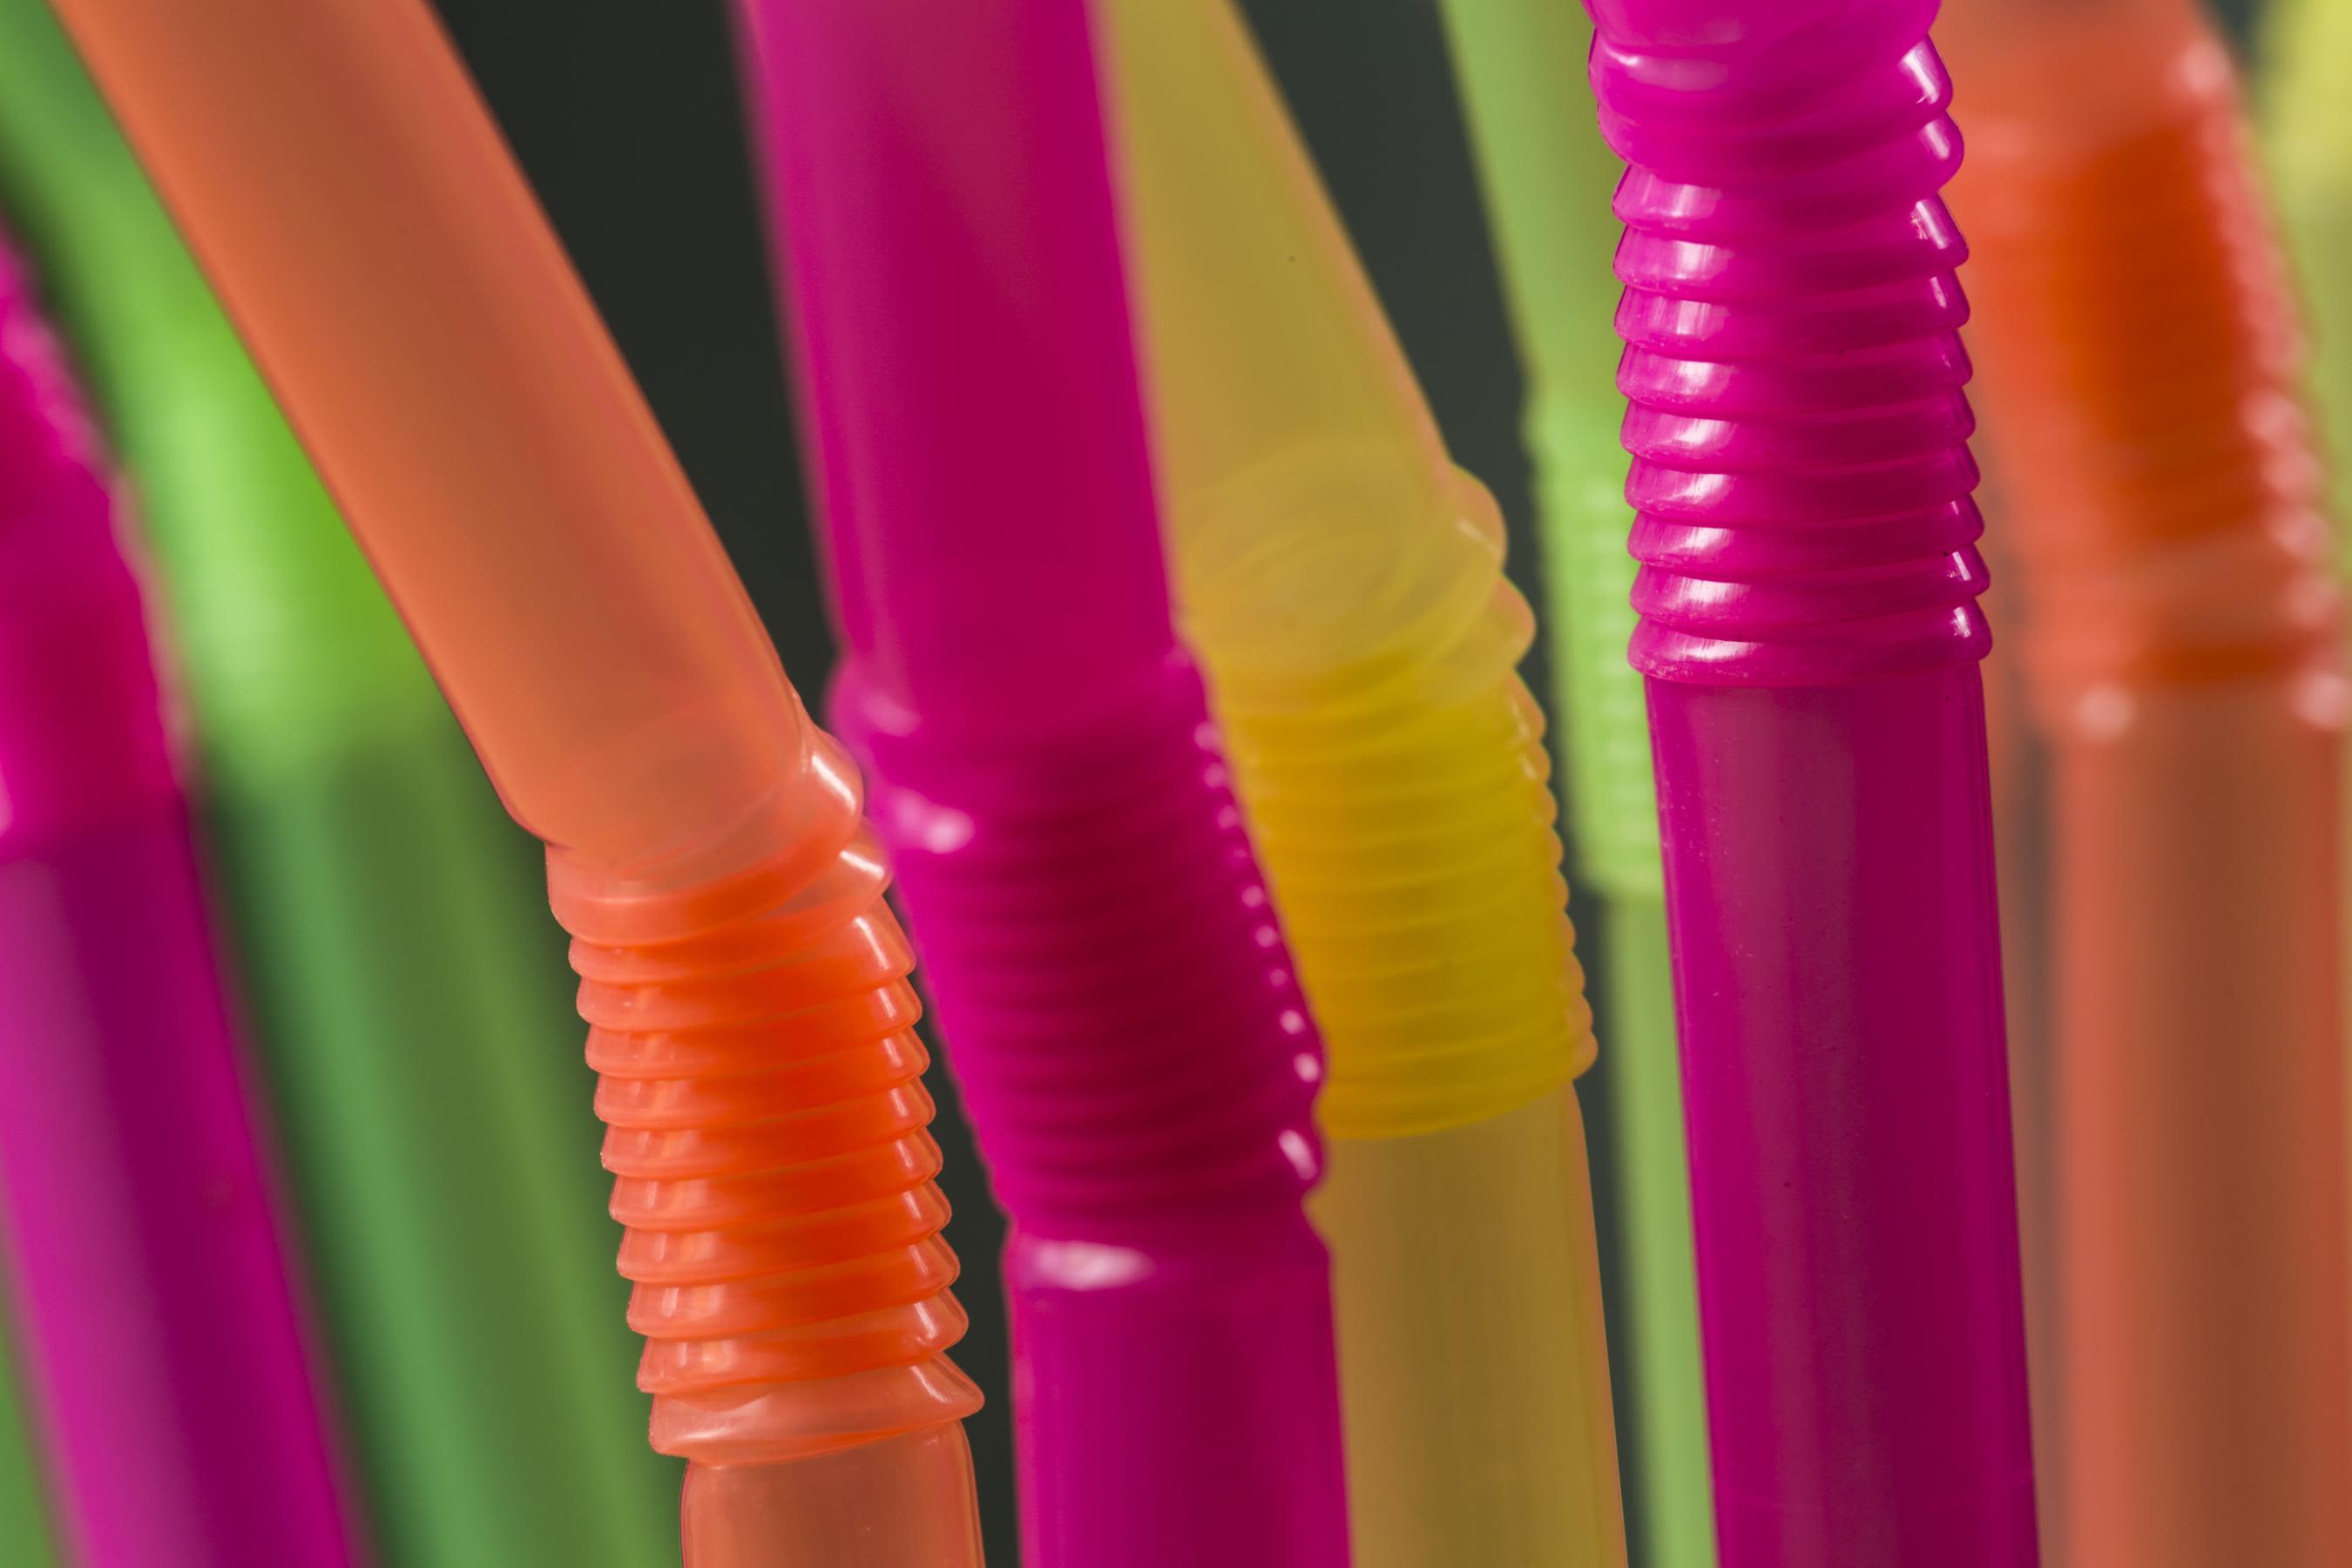 The last straw? Seattle will say goodbye to plastic straws, utensils with  upcoming ban